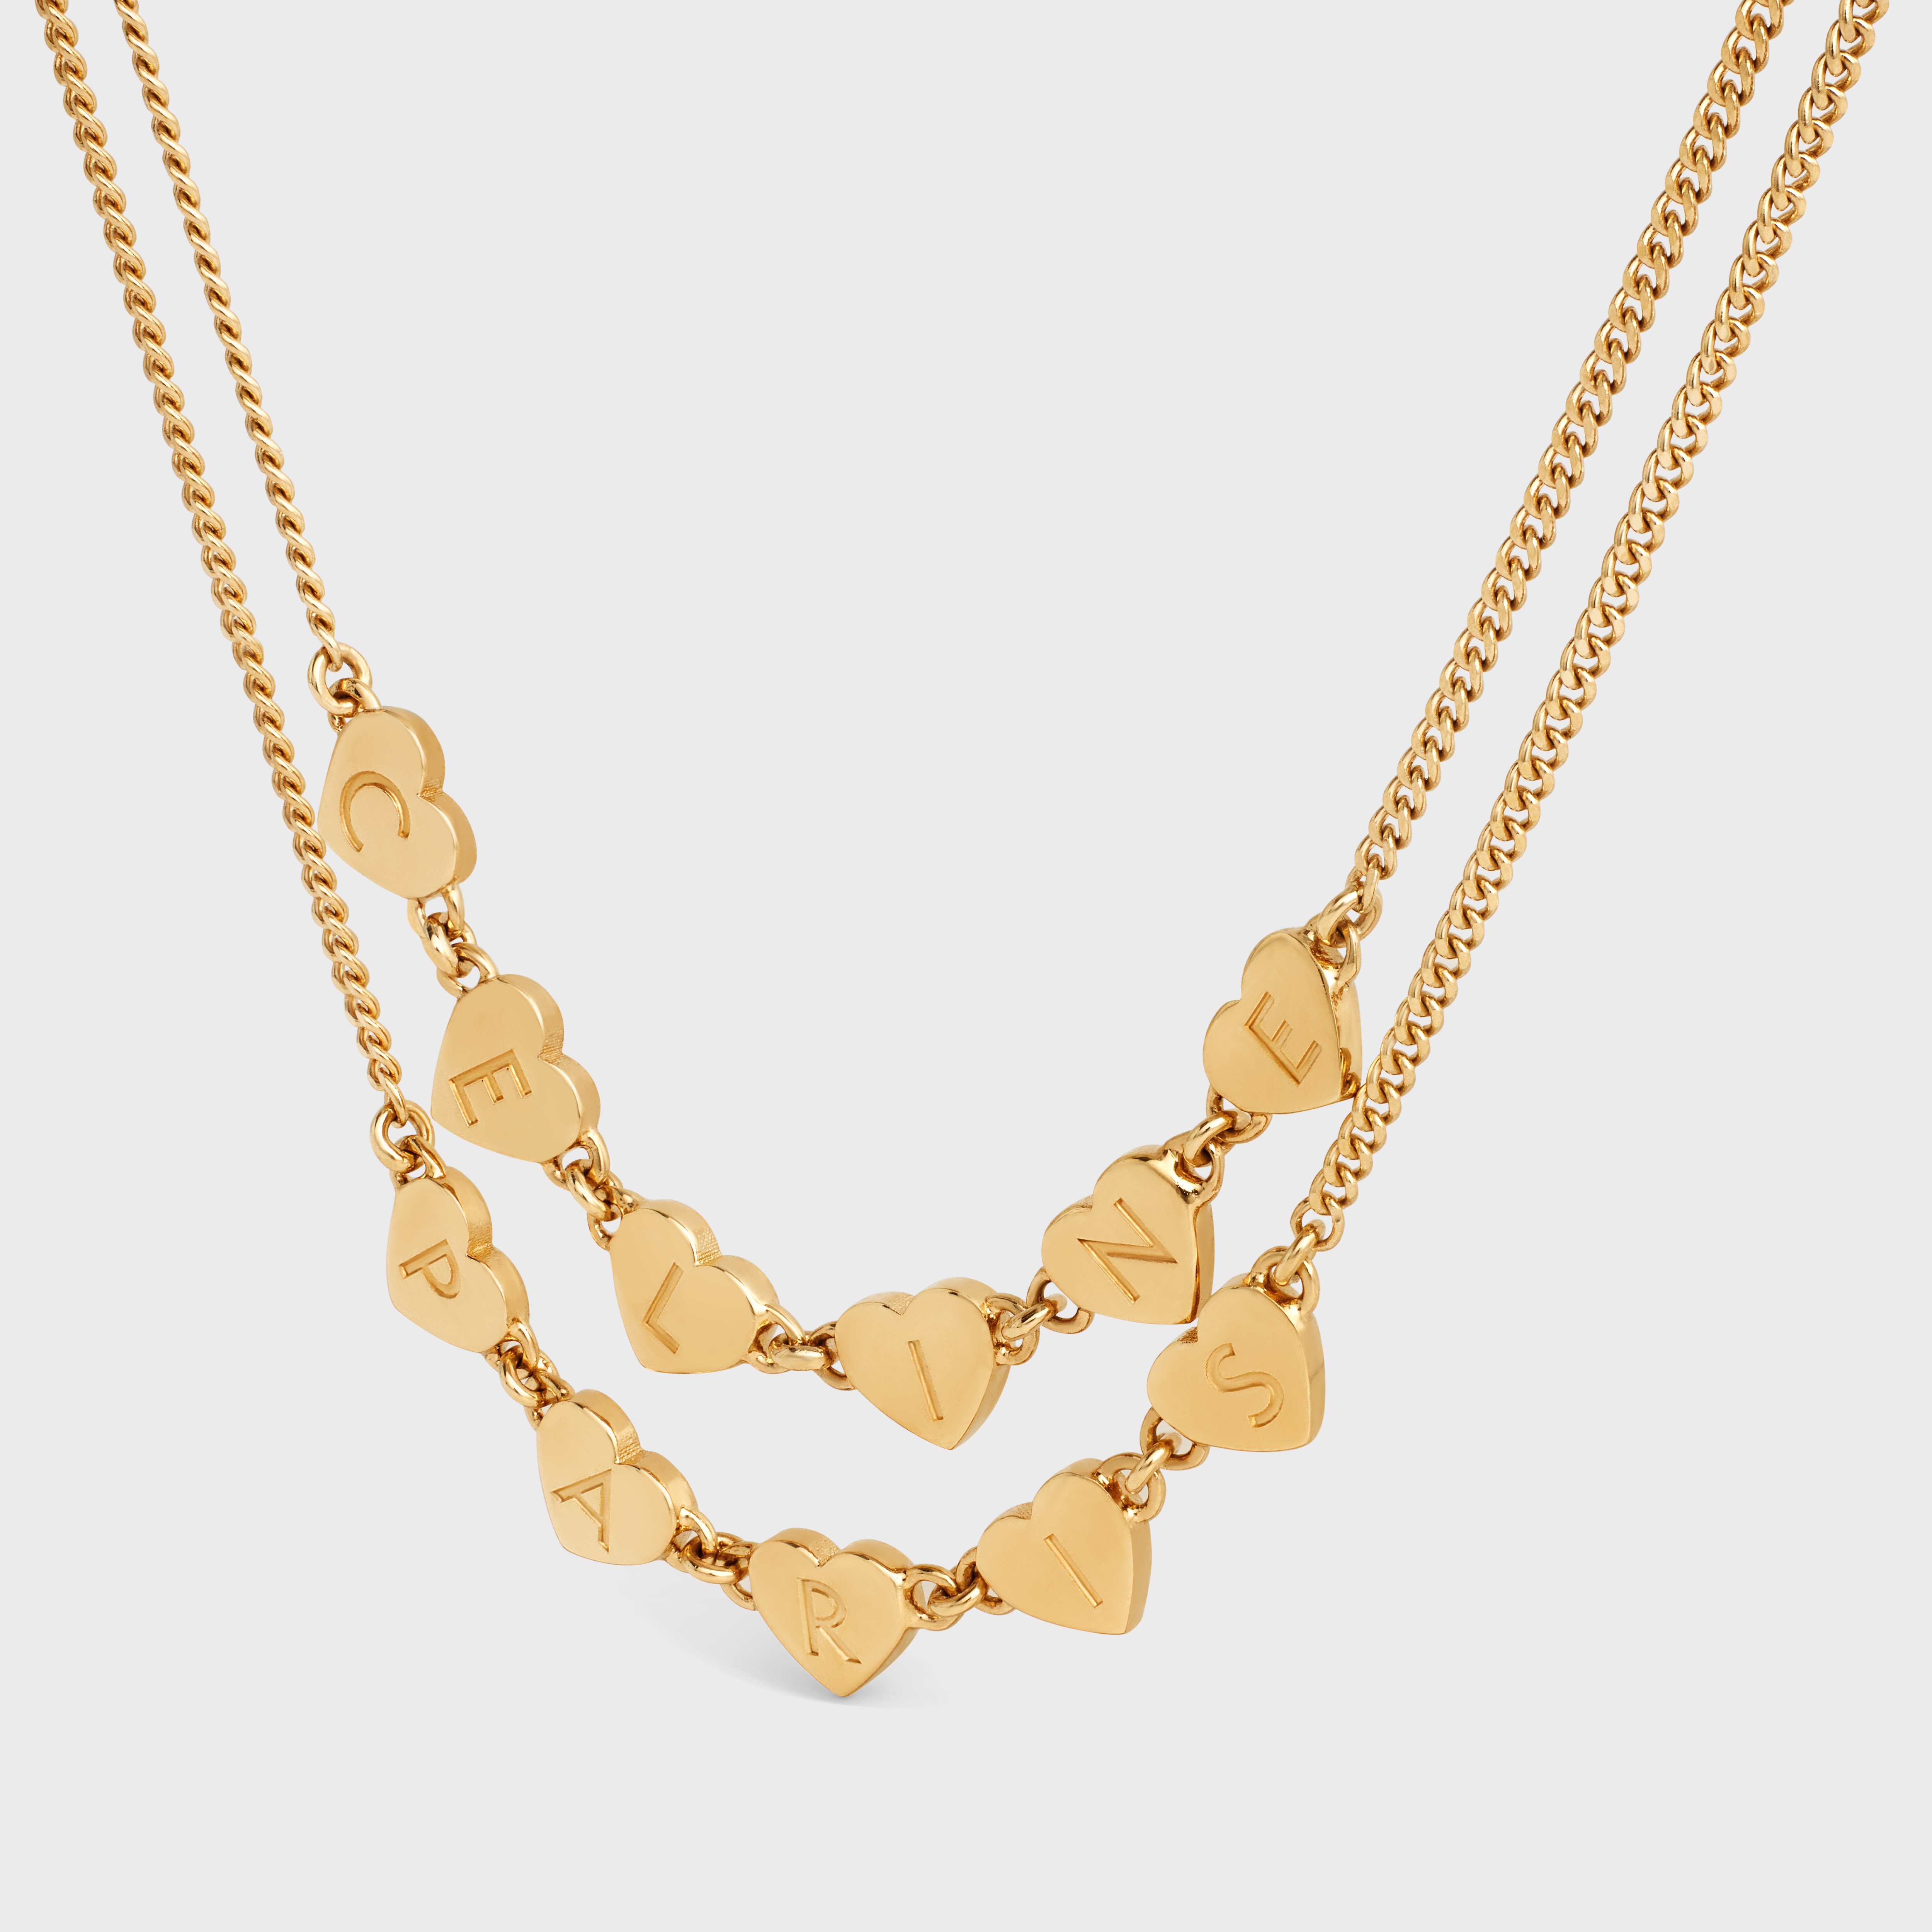 Cœur Celine Double Necklace in Brass with Gold Finish - 2